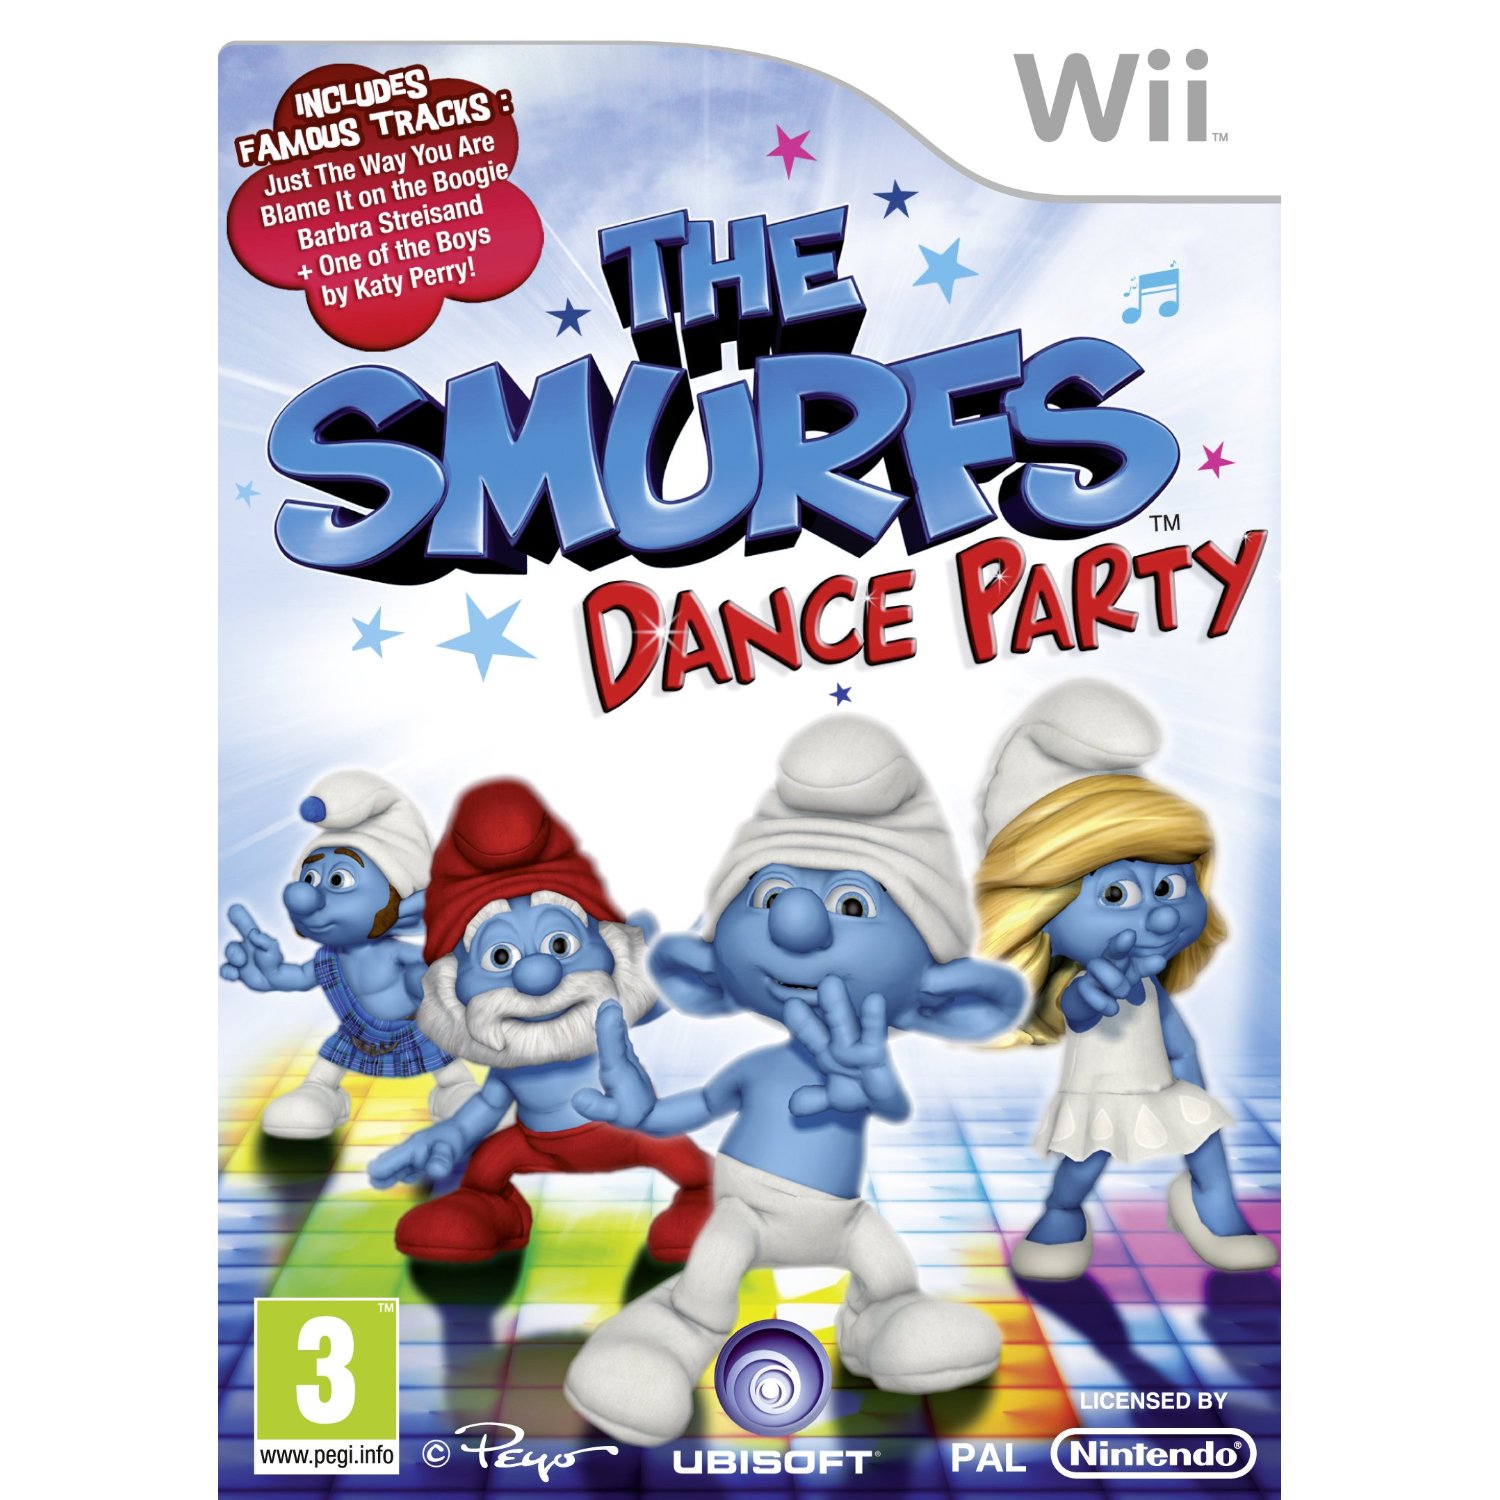 The Smurfs Wii